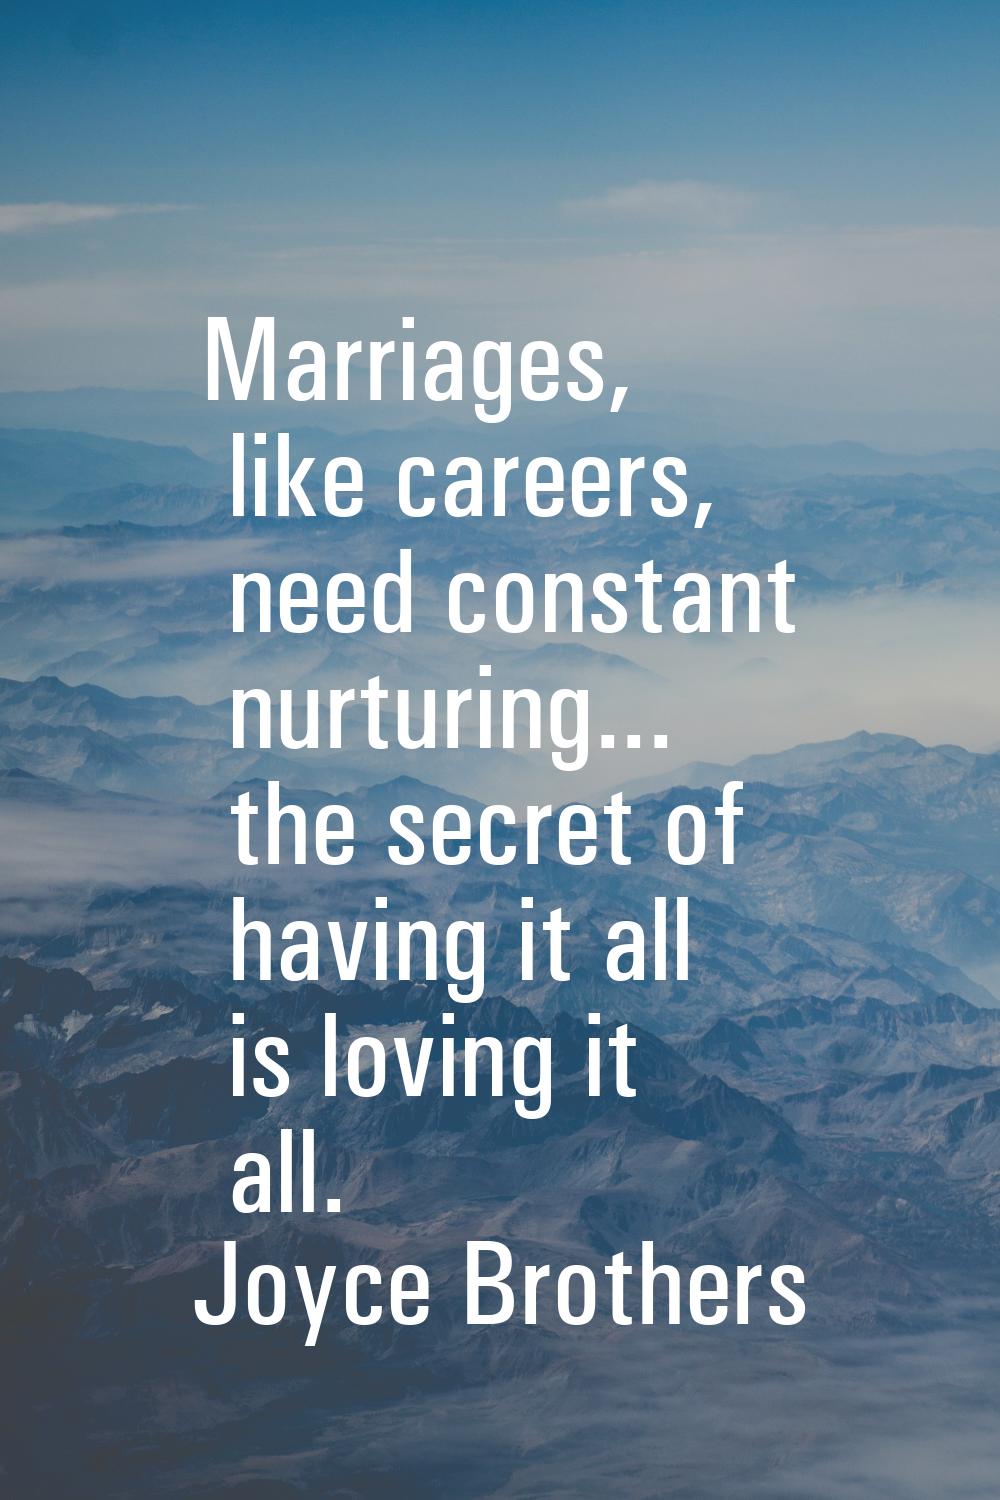 Marriages, like careers, need constant nurturing... the secret of having it all is loving it all.